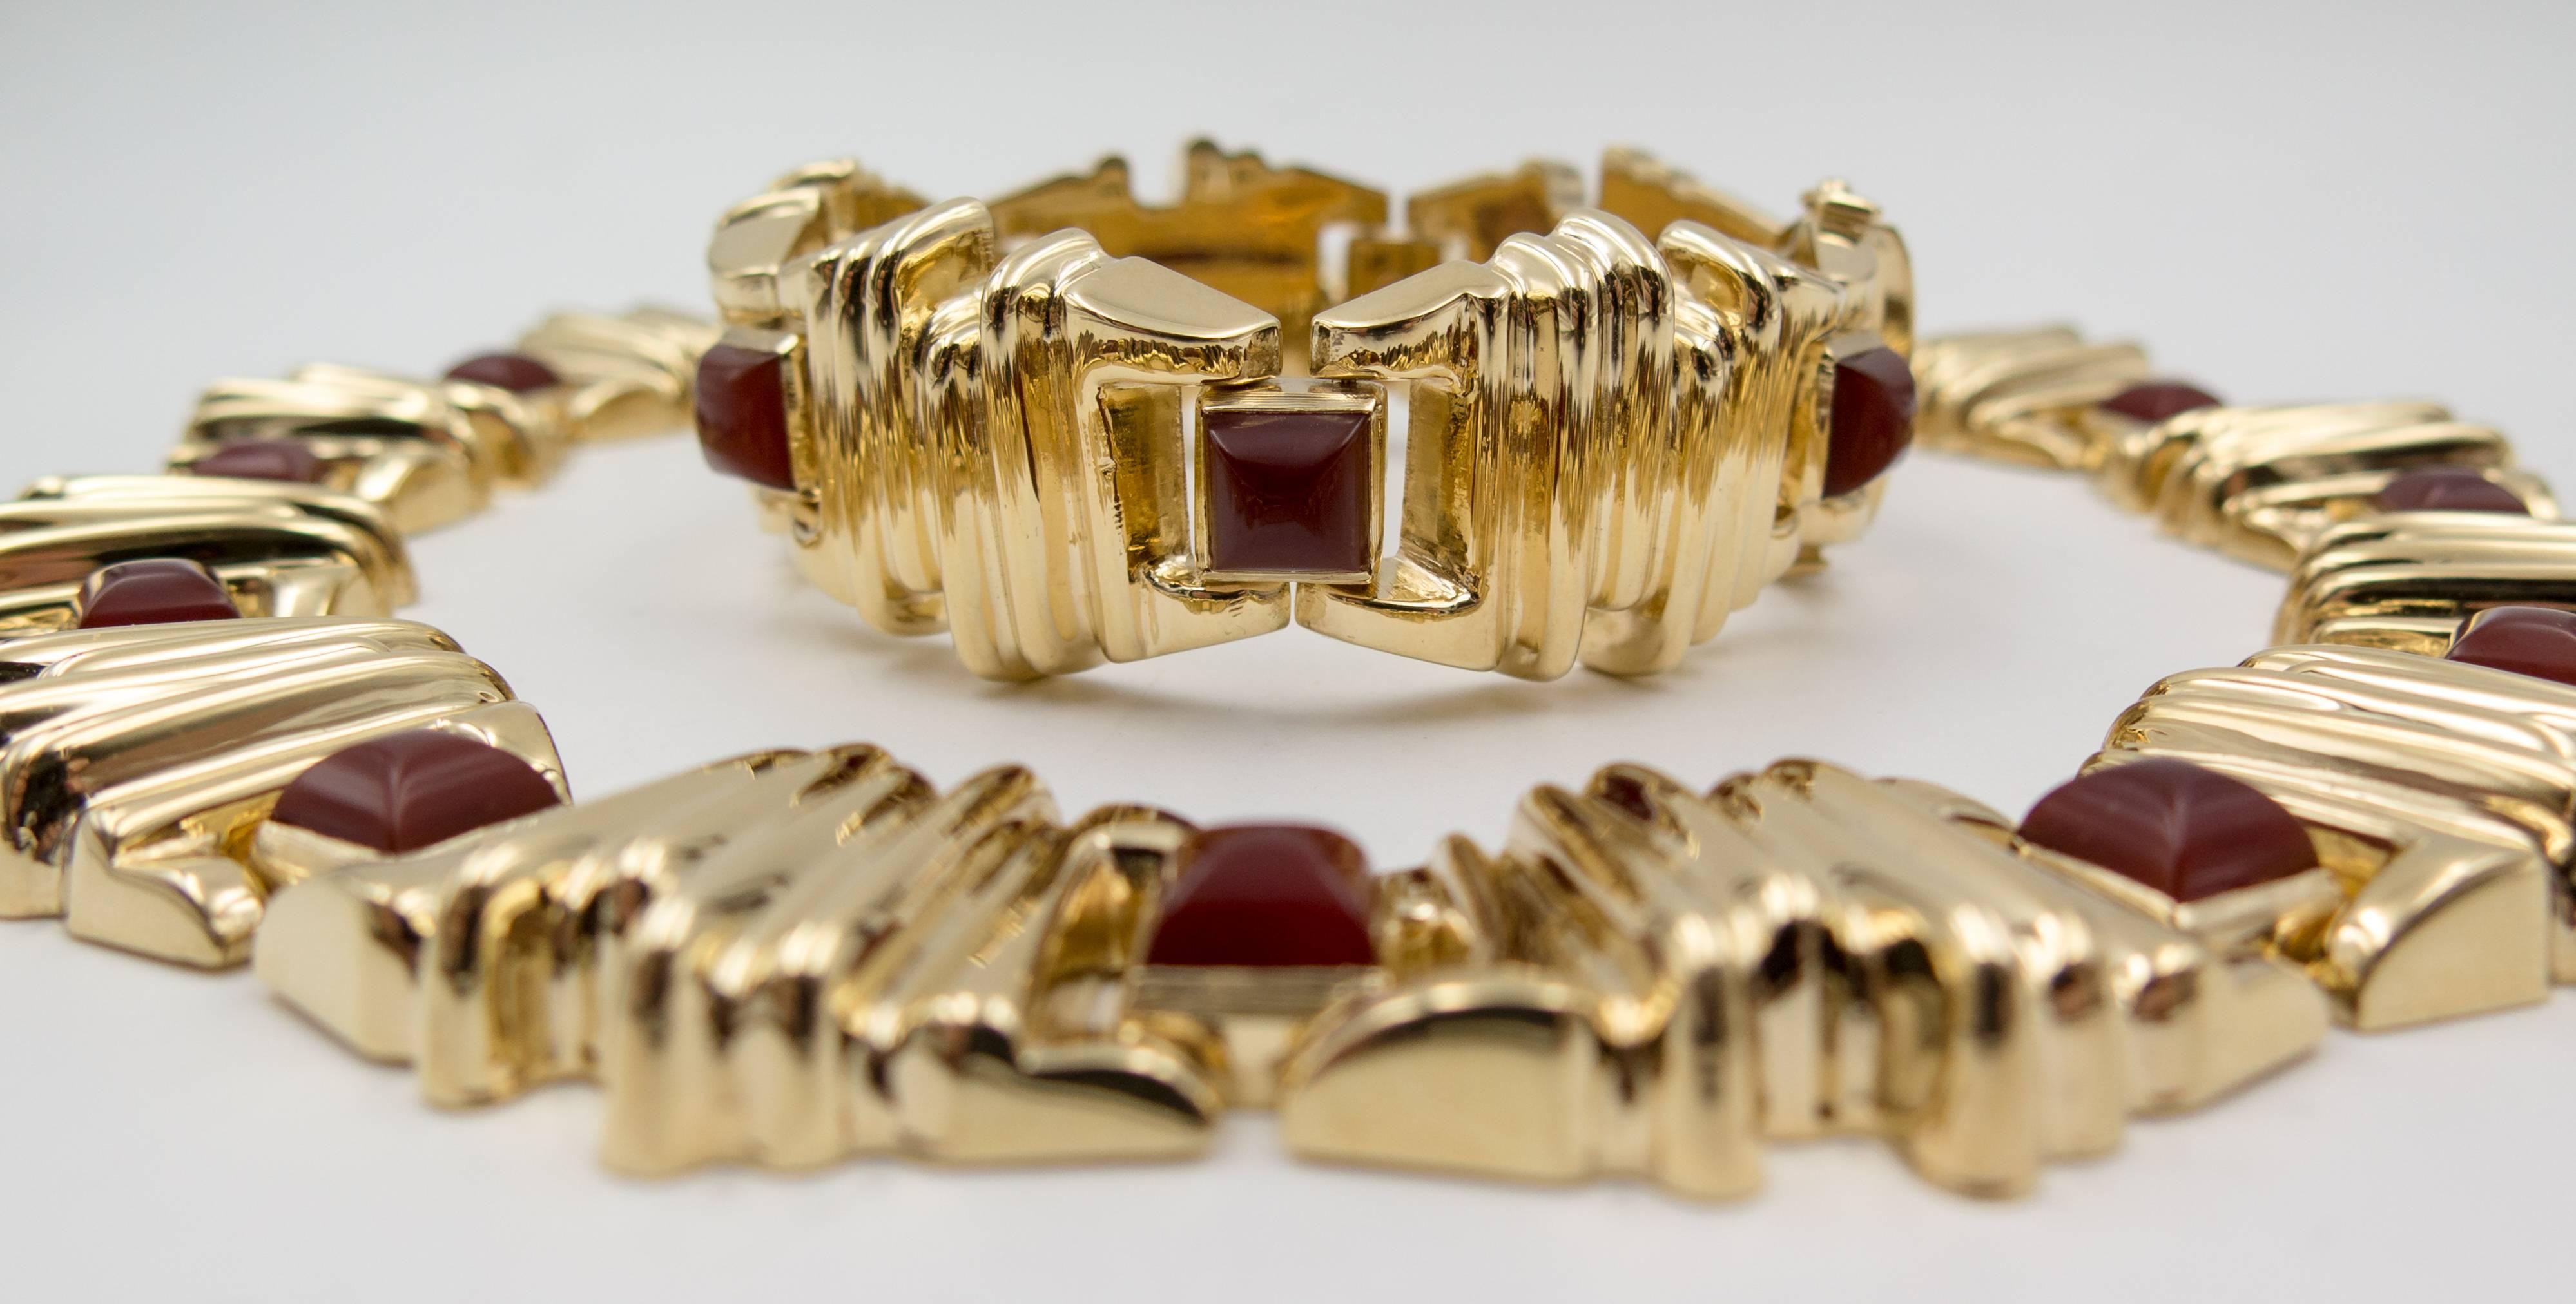 An elegant suite consisting of 14 karat gold geometric elements zigzagging around the neck to alternate with square sugarloaf cut (peaked in the center) rich reddish brown carnelian stones.  The interior diameter of the necklace is 17", which